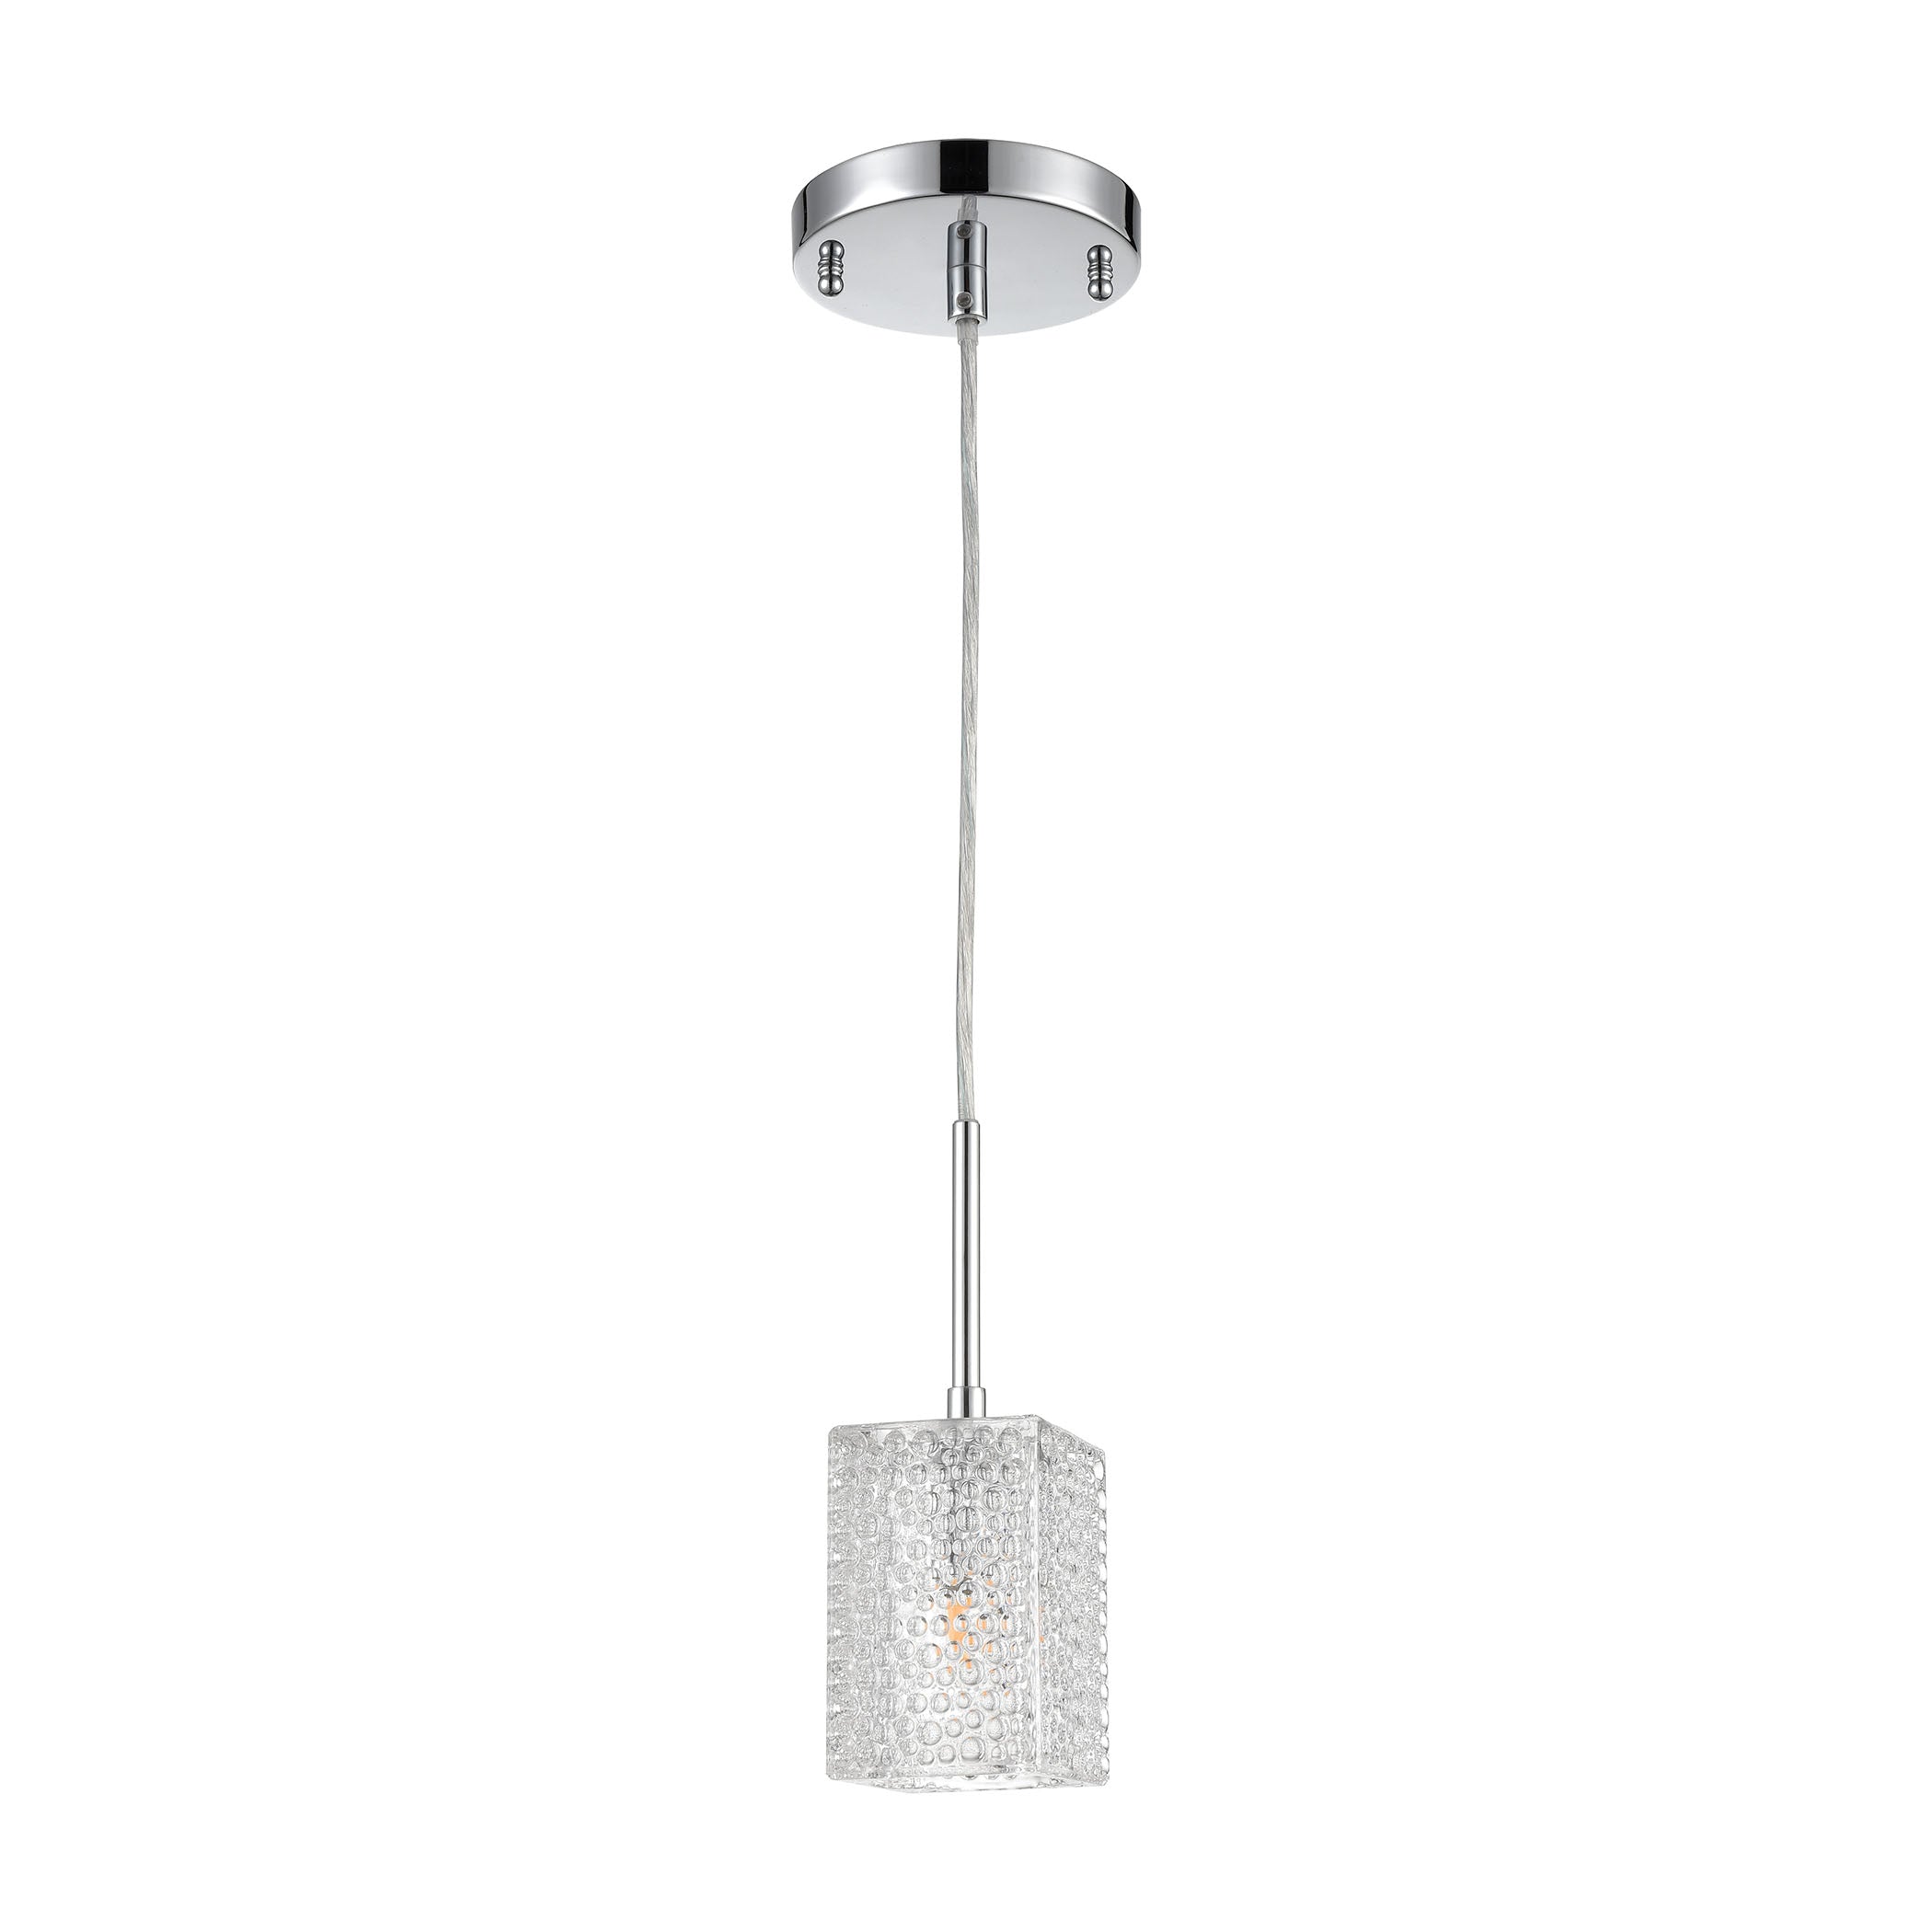 ELK Lighting 17434/1 Ezra 1-Light Mini Pendant in Polished Chrome with Textured Clear Crystal